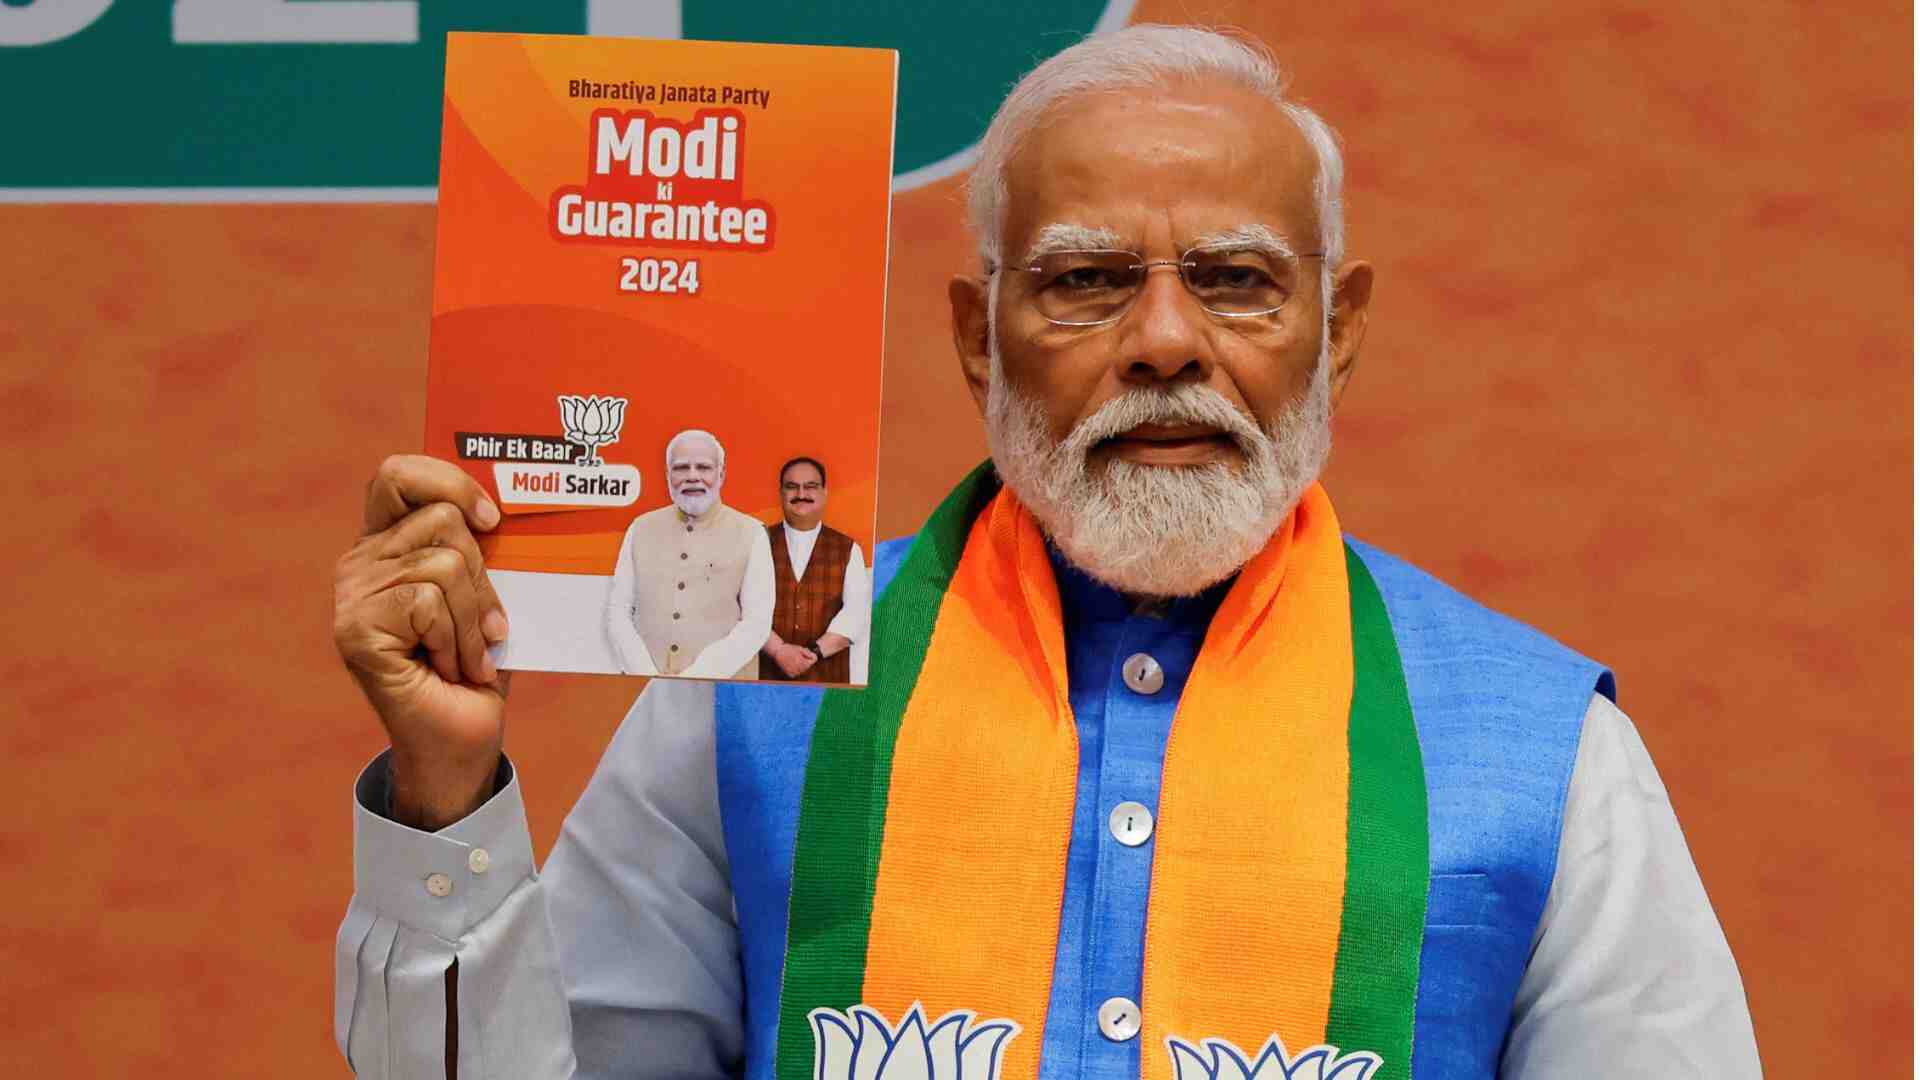 BJP Manifesto For 2024: From Uniform Civil Code To One Nation One Election– 10 Key Points